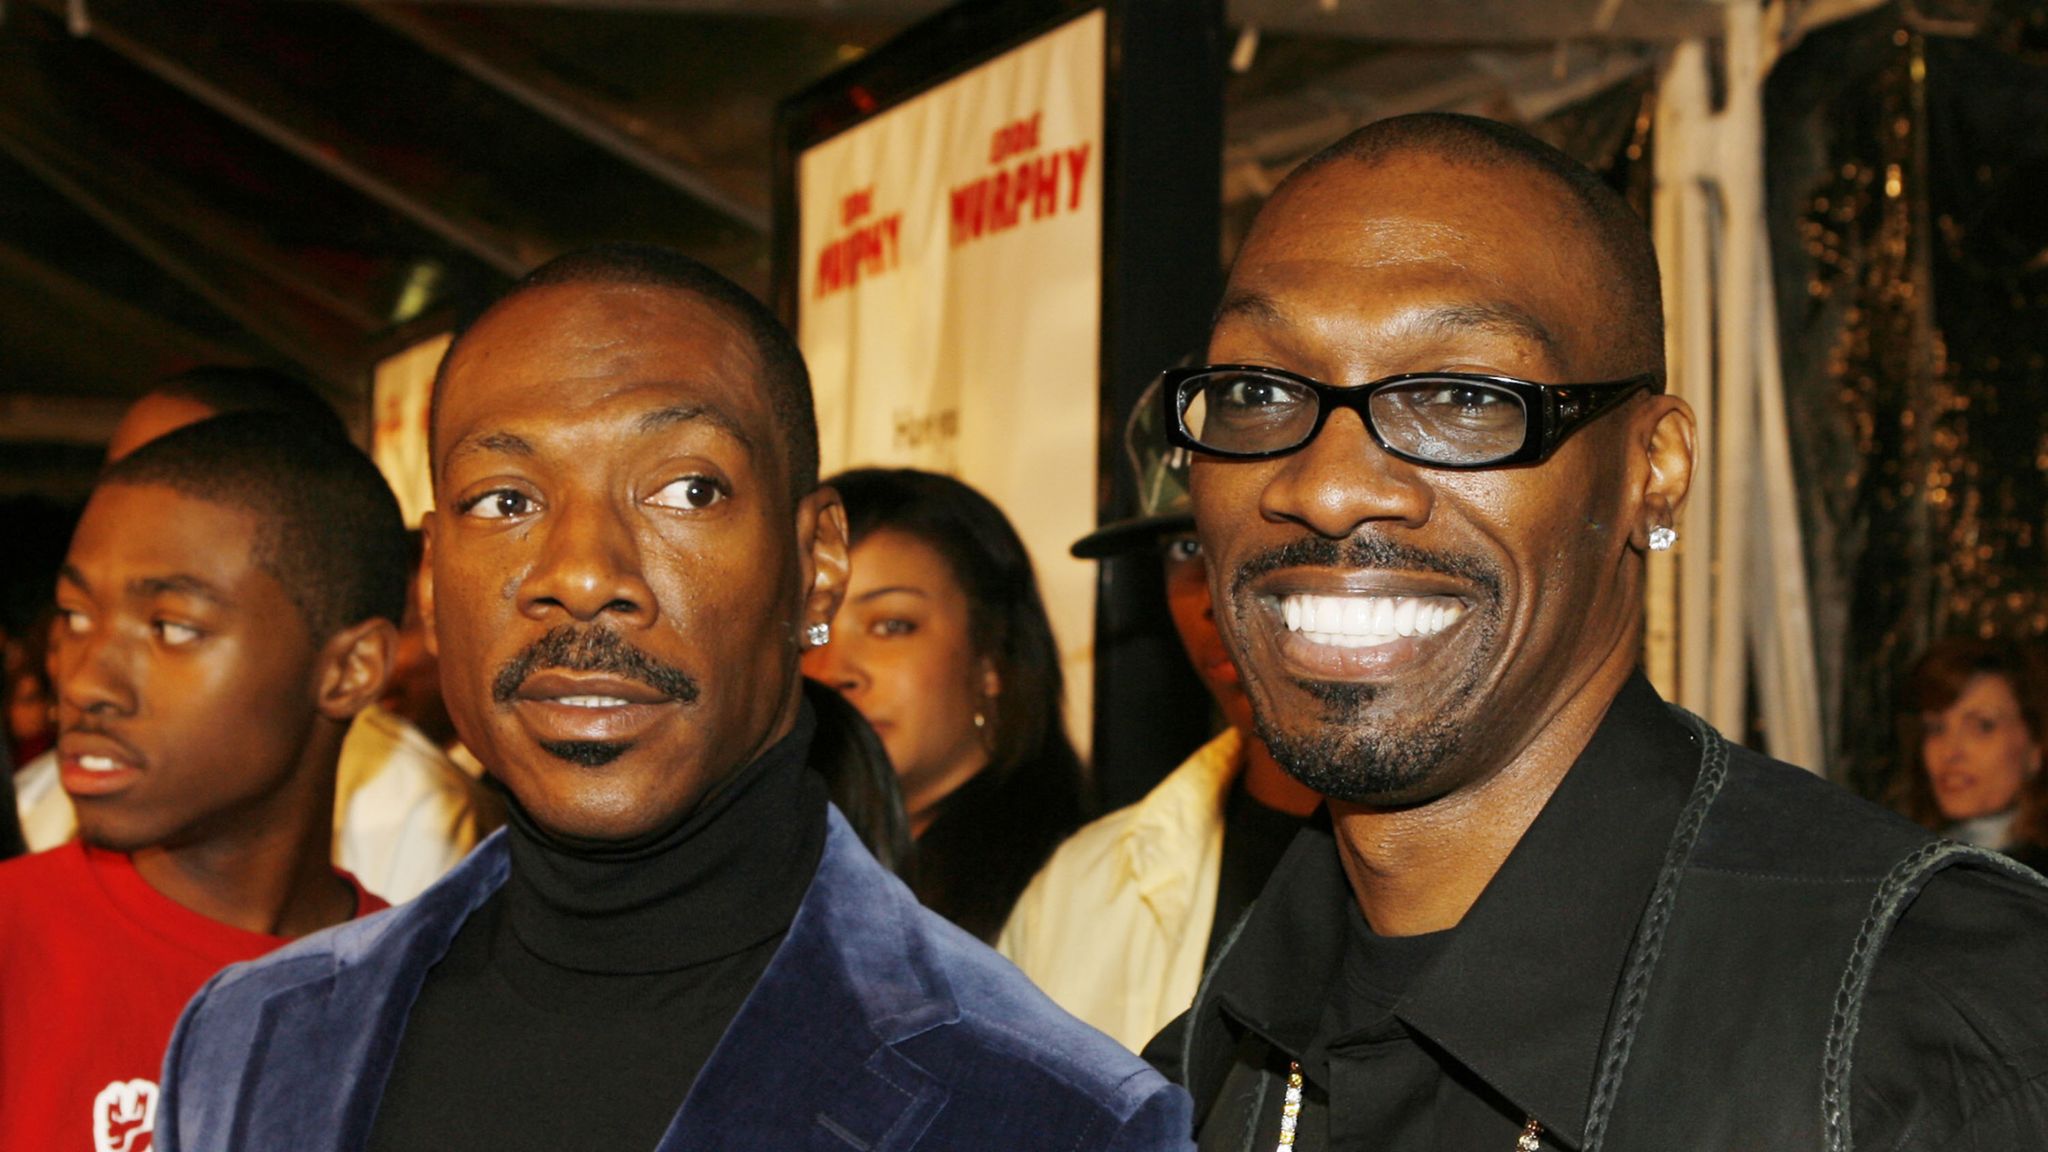 Eddie Murphy Pays Tribute After Brother Charlie Dies Aged 57 Ents And Arts News Sky News 